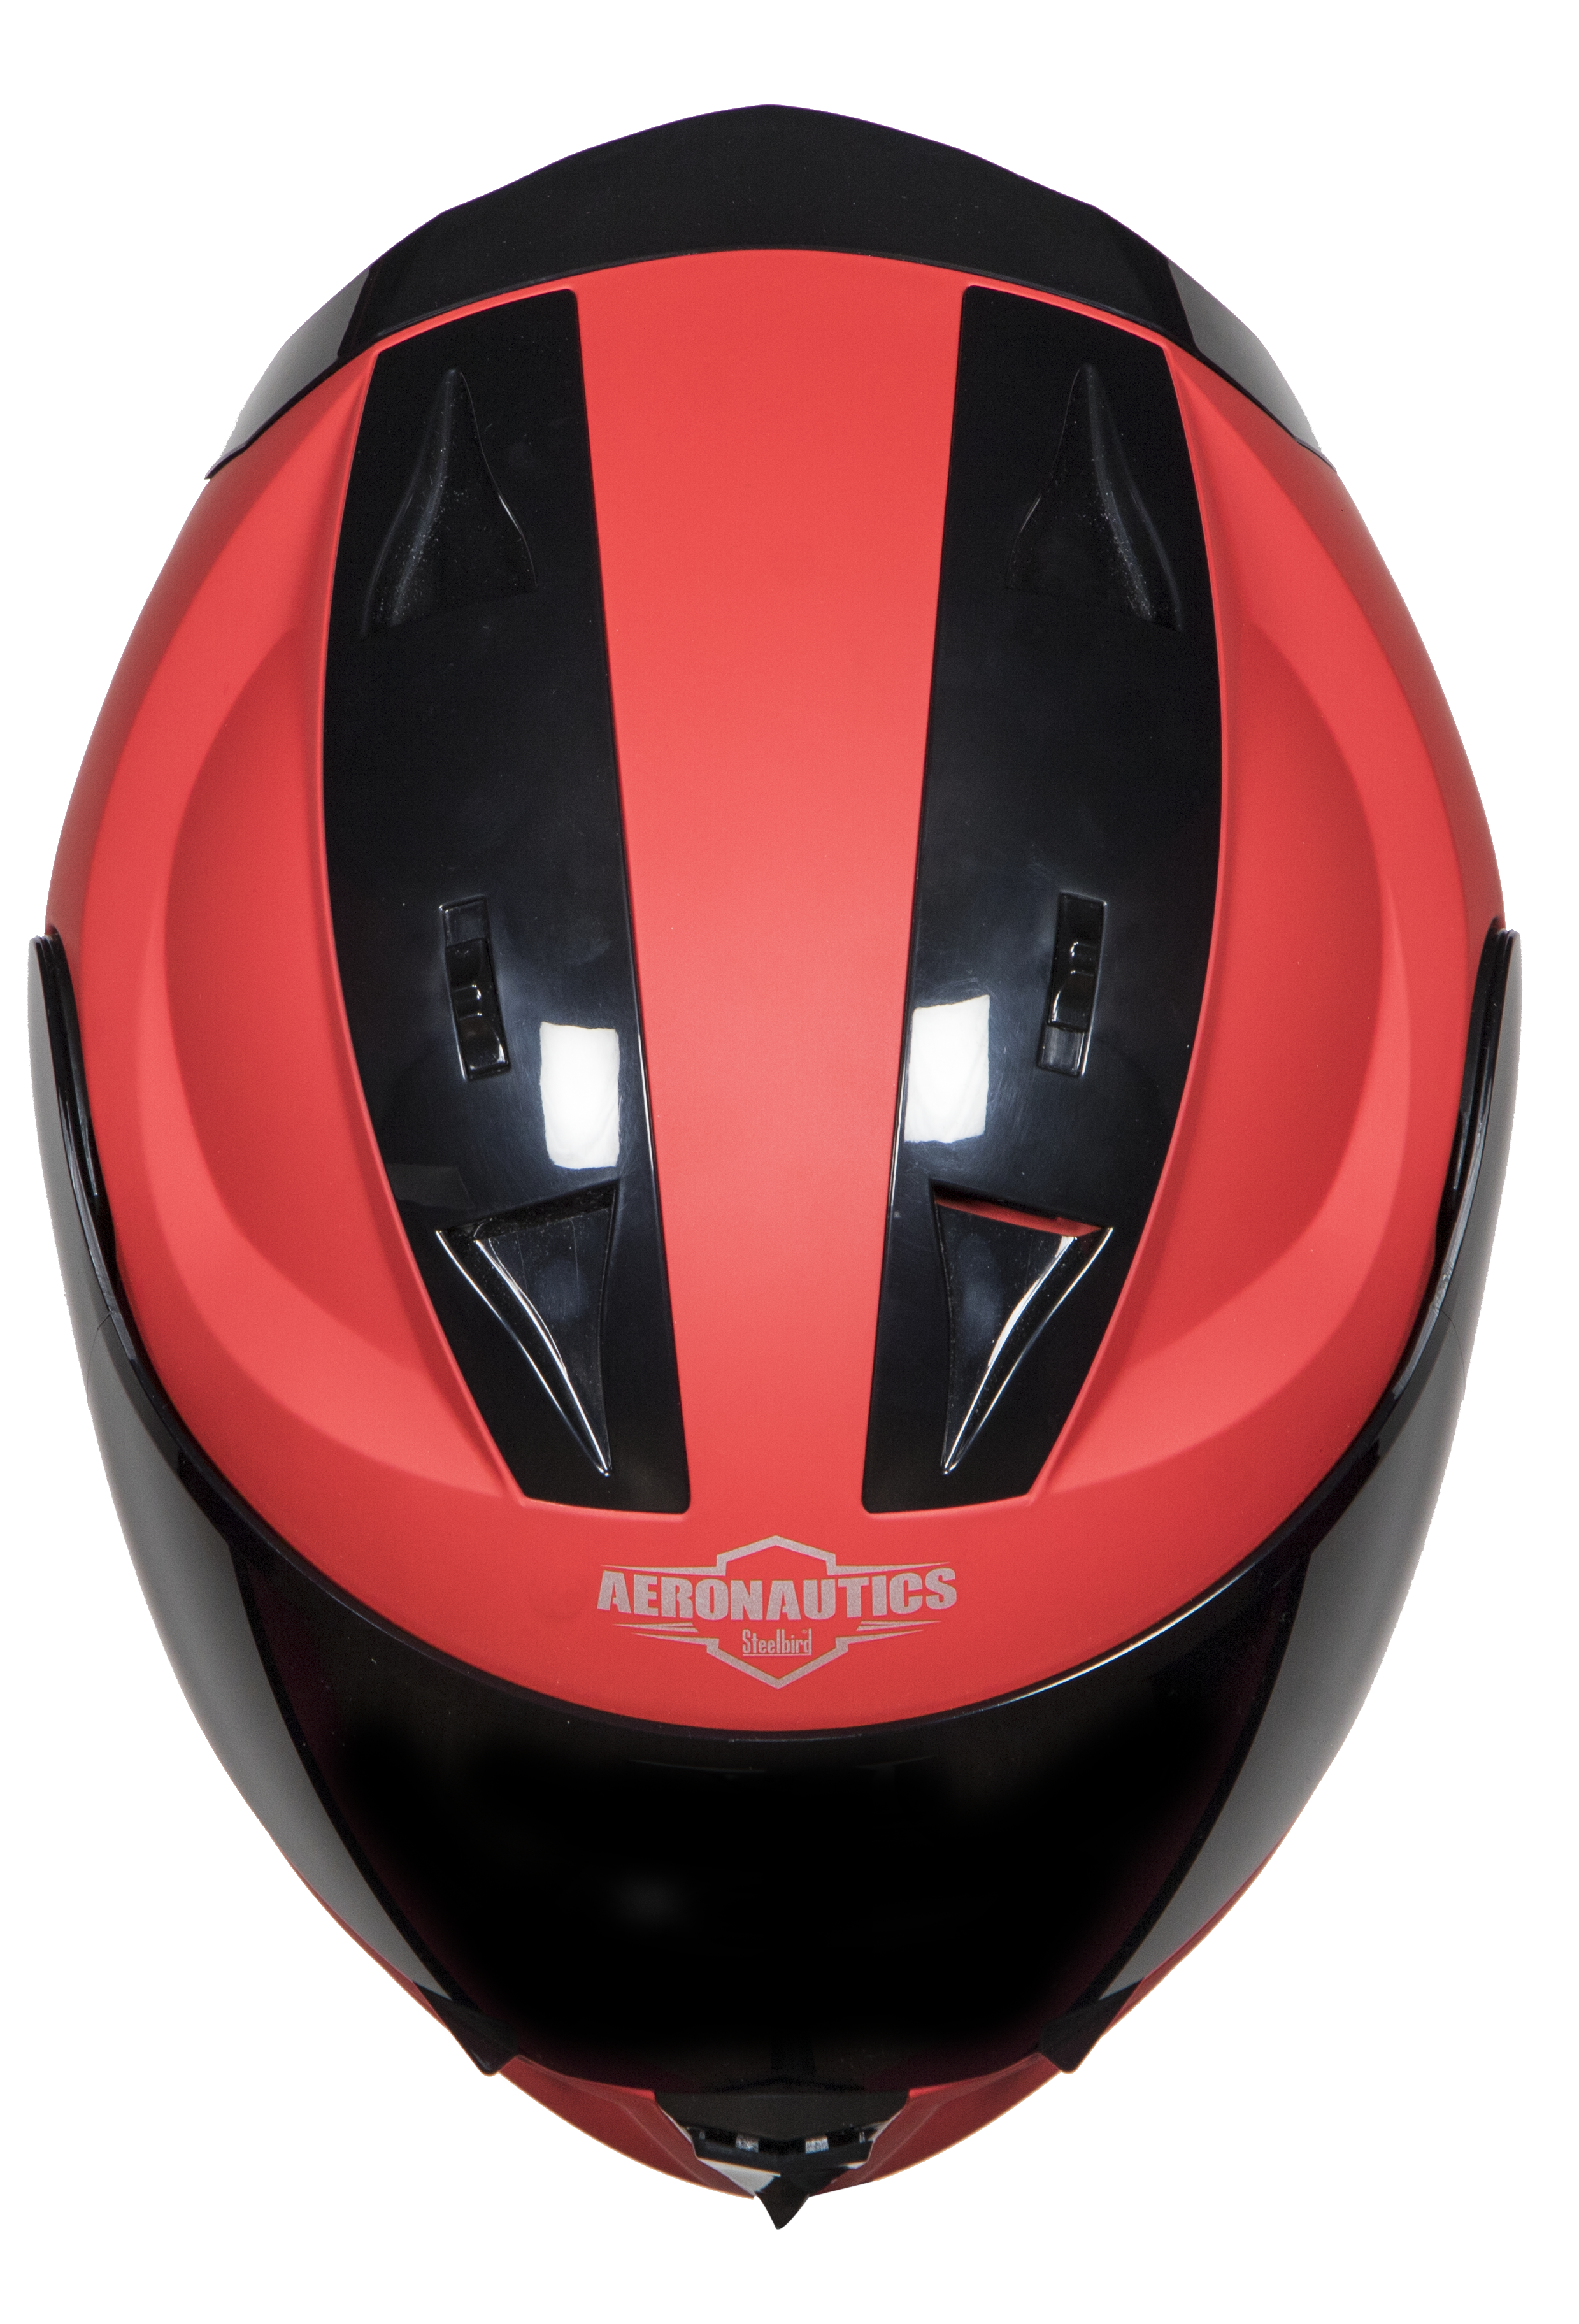 SA-1 Aeronautics Mat Sports Red ( Fitted With Clear Visor Extra Silver Chrome Visor Free)